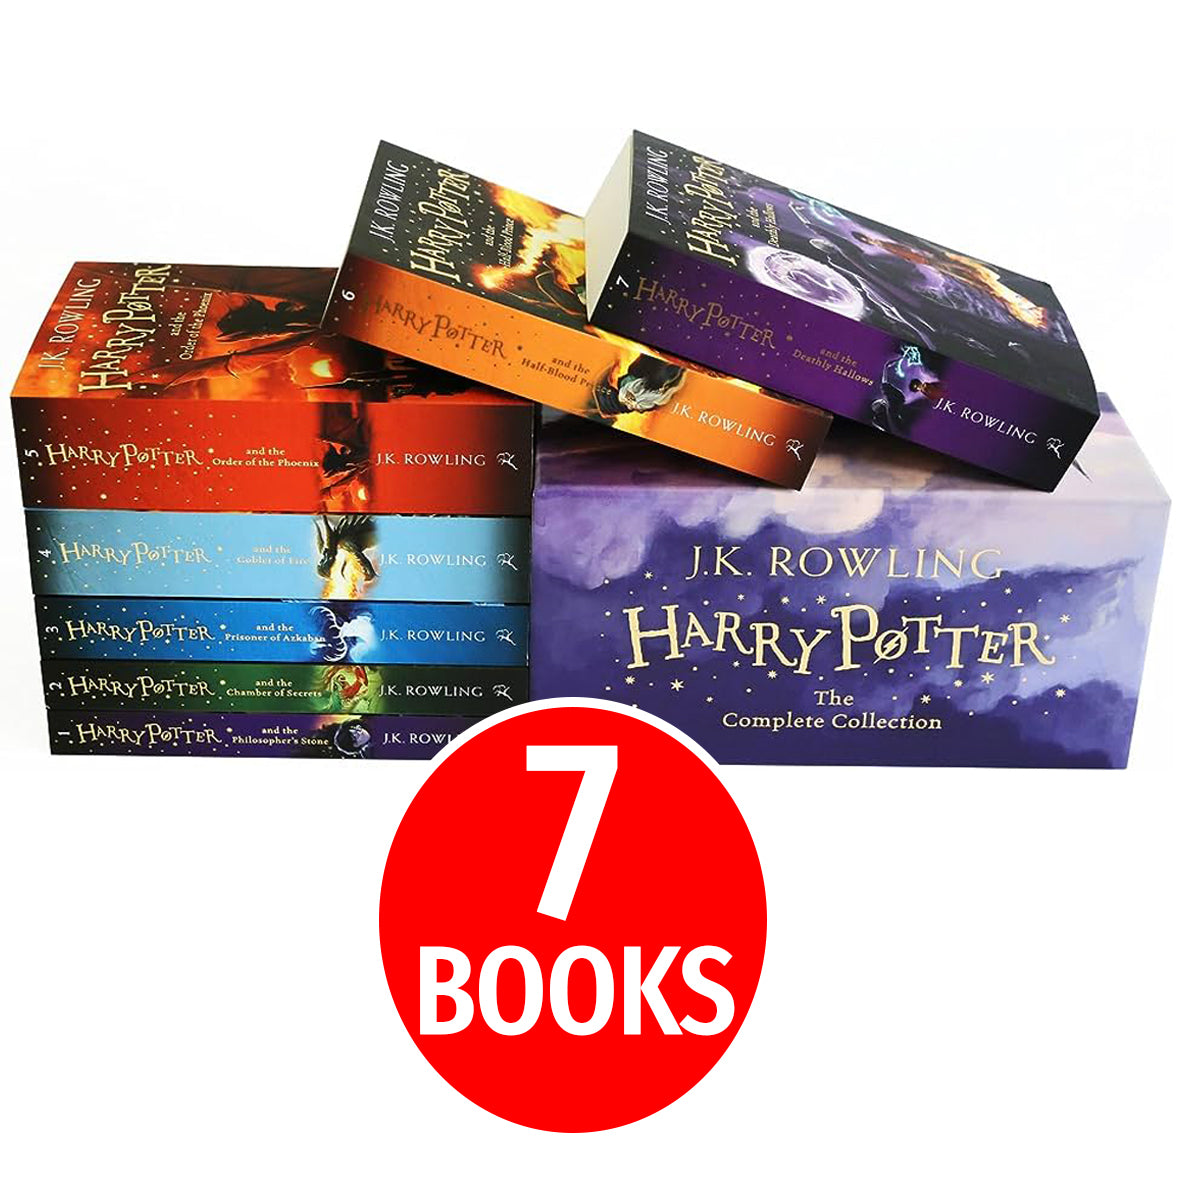 Harry Potter Box Set-The Complete Collection (Children’s Paperback)